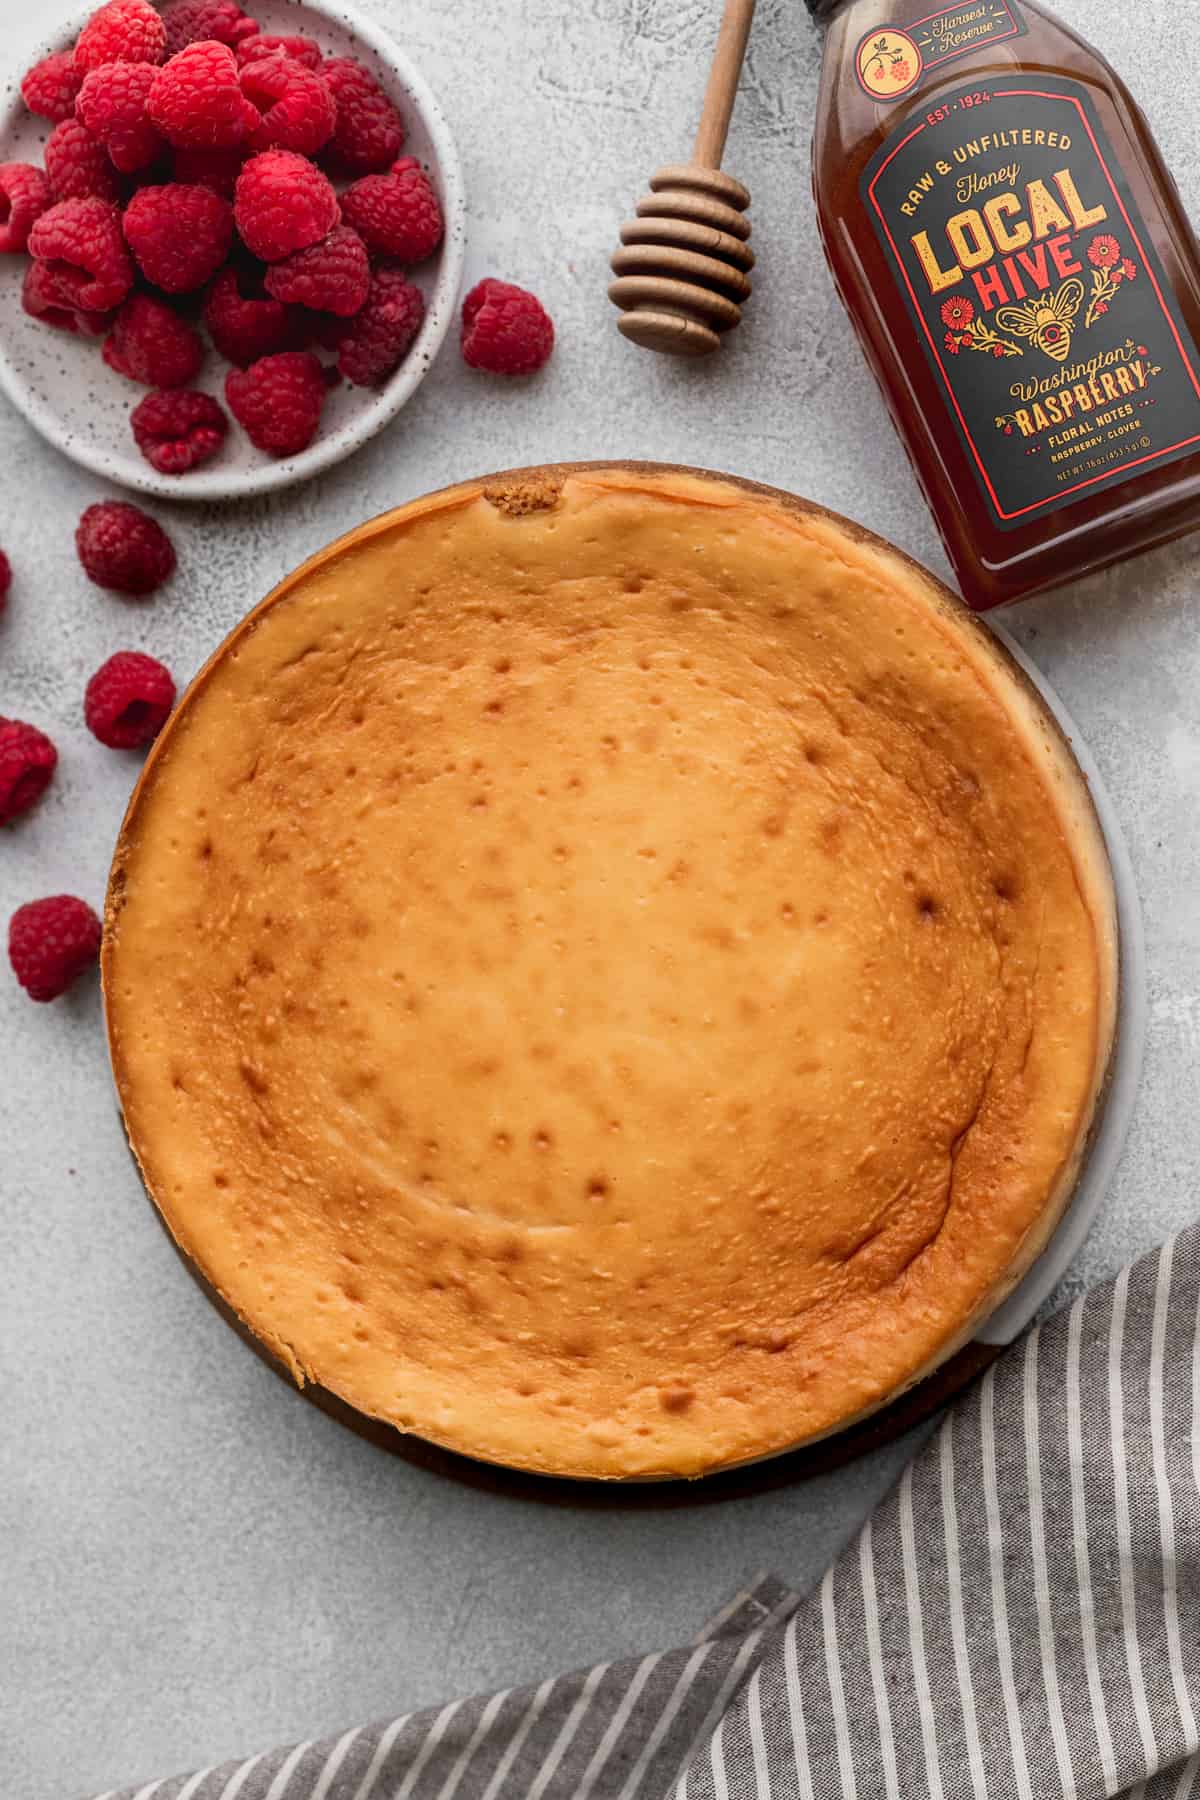 Baked cheesecake on a platter surrounded by raspberries.